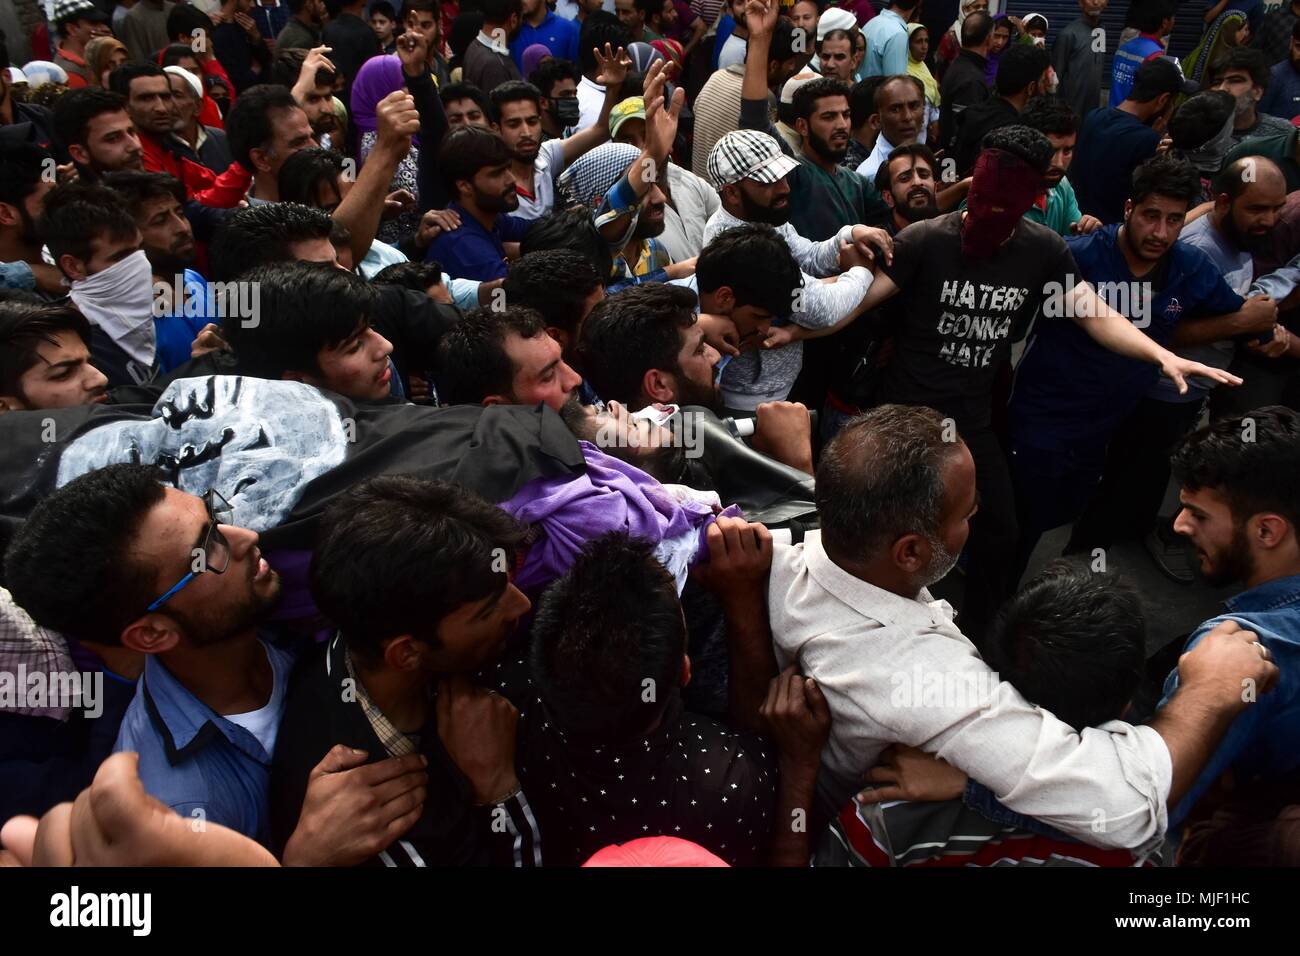 Kashmir, India, 5 May 2018.  (EDITORS NOTE: Image depicts death.) Kashmiri residents carry the body of Adil Ahmad, a civilian who was run over and killed by a security force vehicle, during his funeral procession in Srinagar, Indian administered Kashmir. Three suspected militants and one civilian have been killed while three Indian paramilitary men sustained injuries in a gun battle in Srinagar, the summer capital of Indian administered Kashmir. The encounter started after government forces cordoned off a Chattabal area following the presence of militants in the area, officials said. Credit: Z Stock Photo